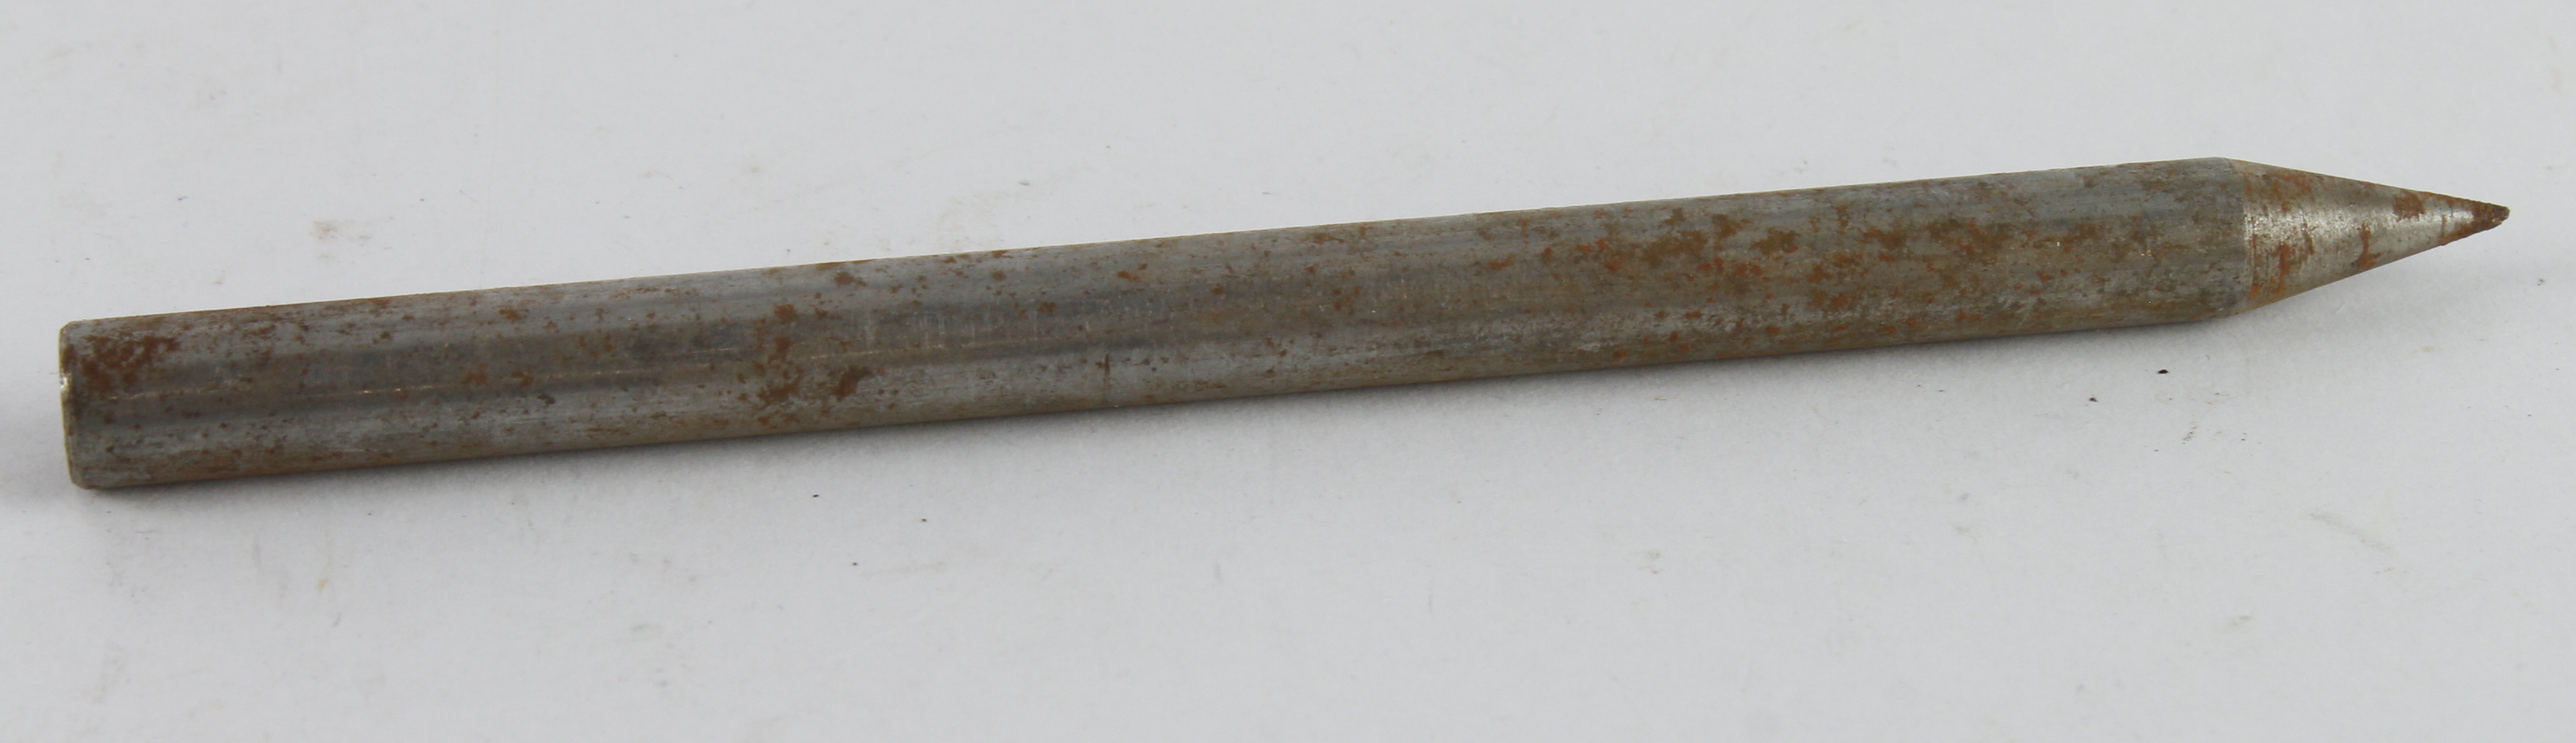 WW1 Incendiary Flechette dart as dropped by aircraft over enemy troops.